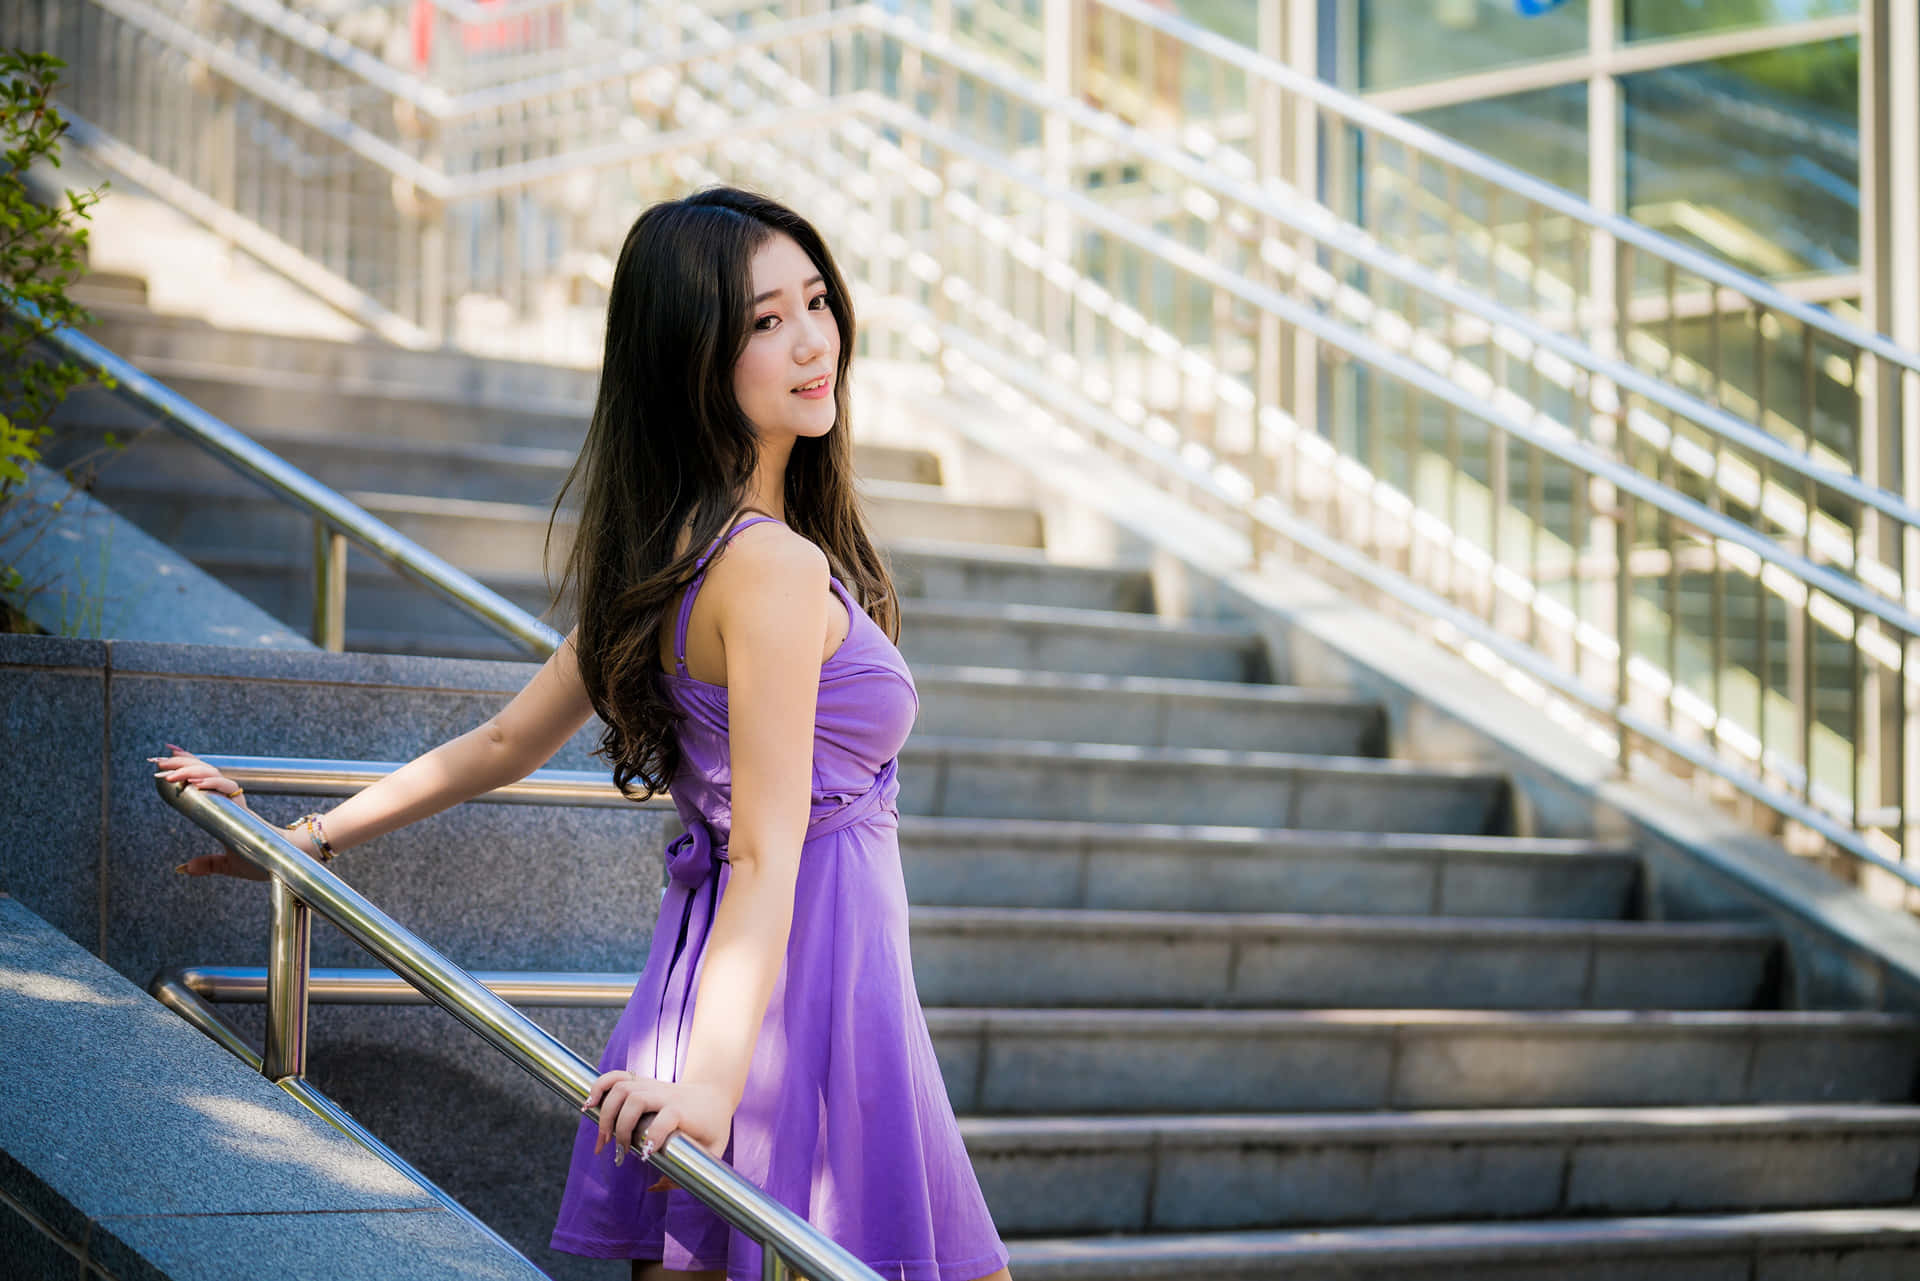 Flaunt your style with this stunning Purple Dress Wallpaper